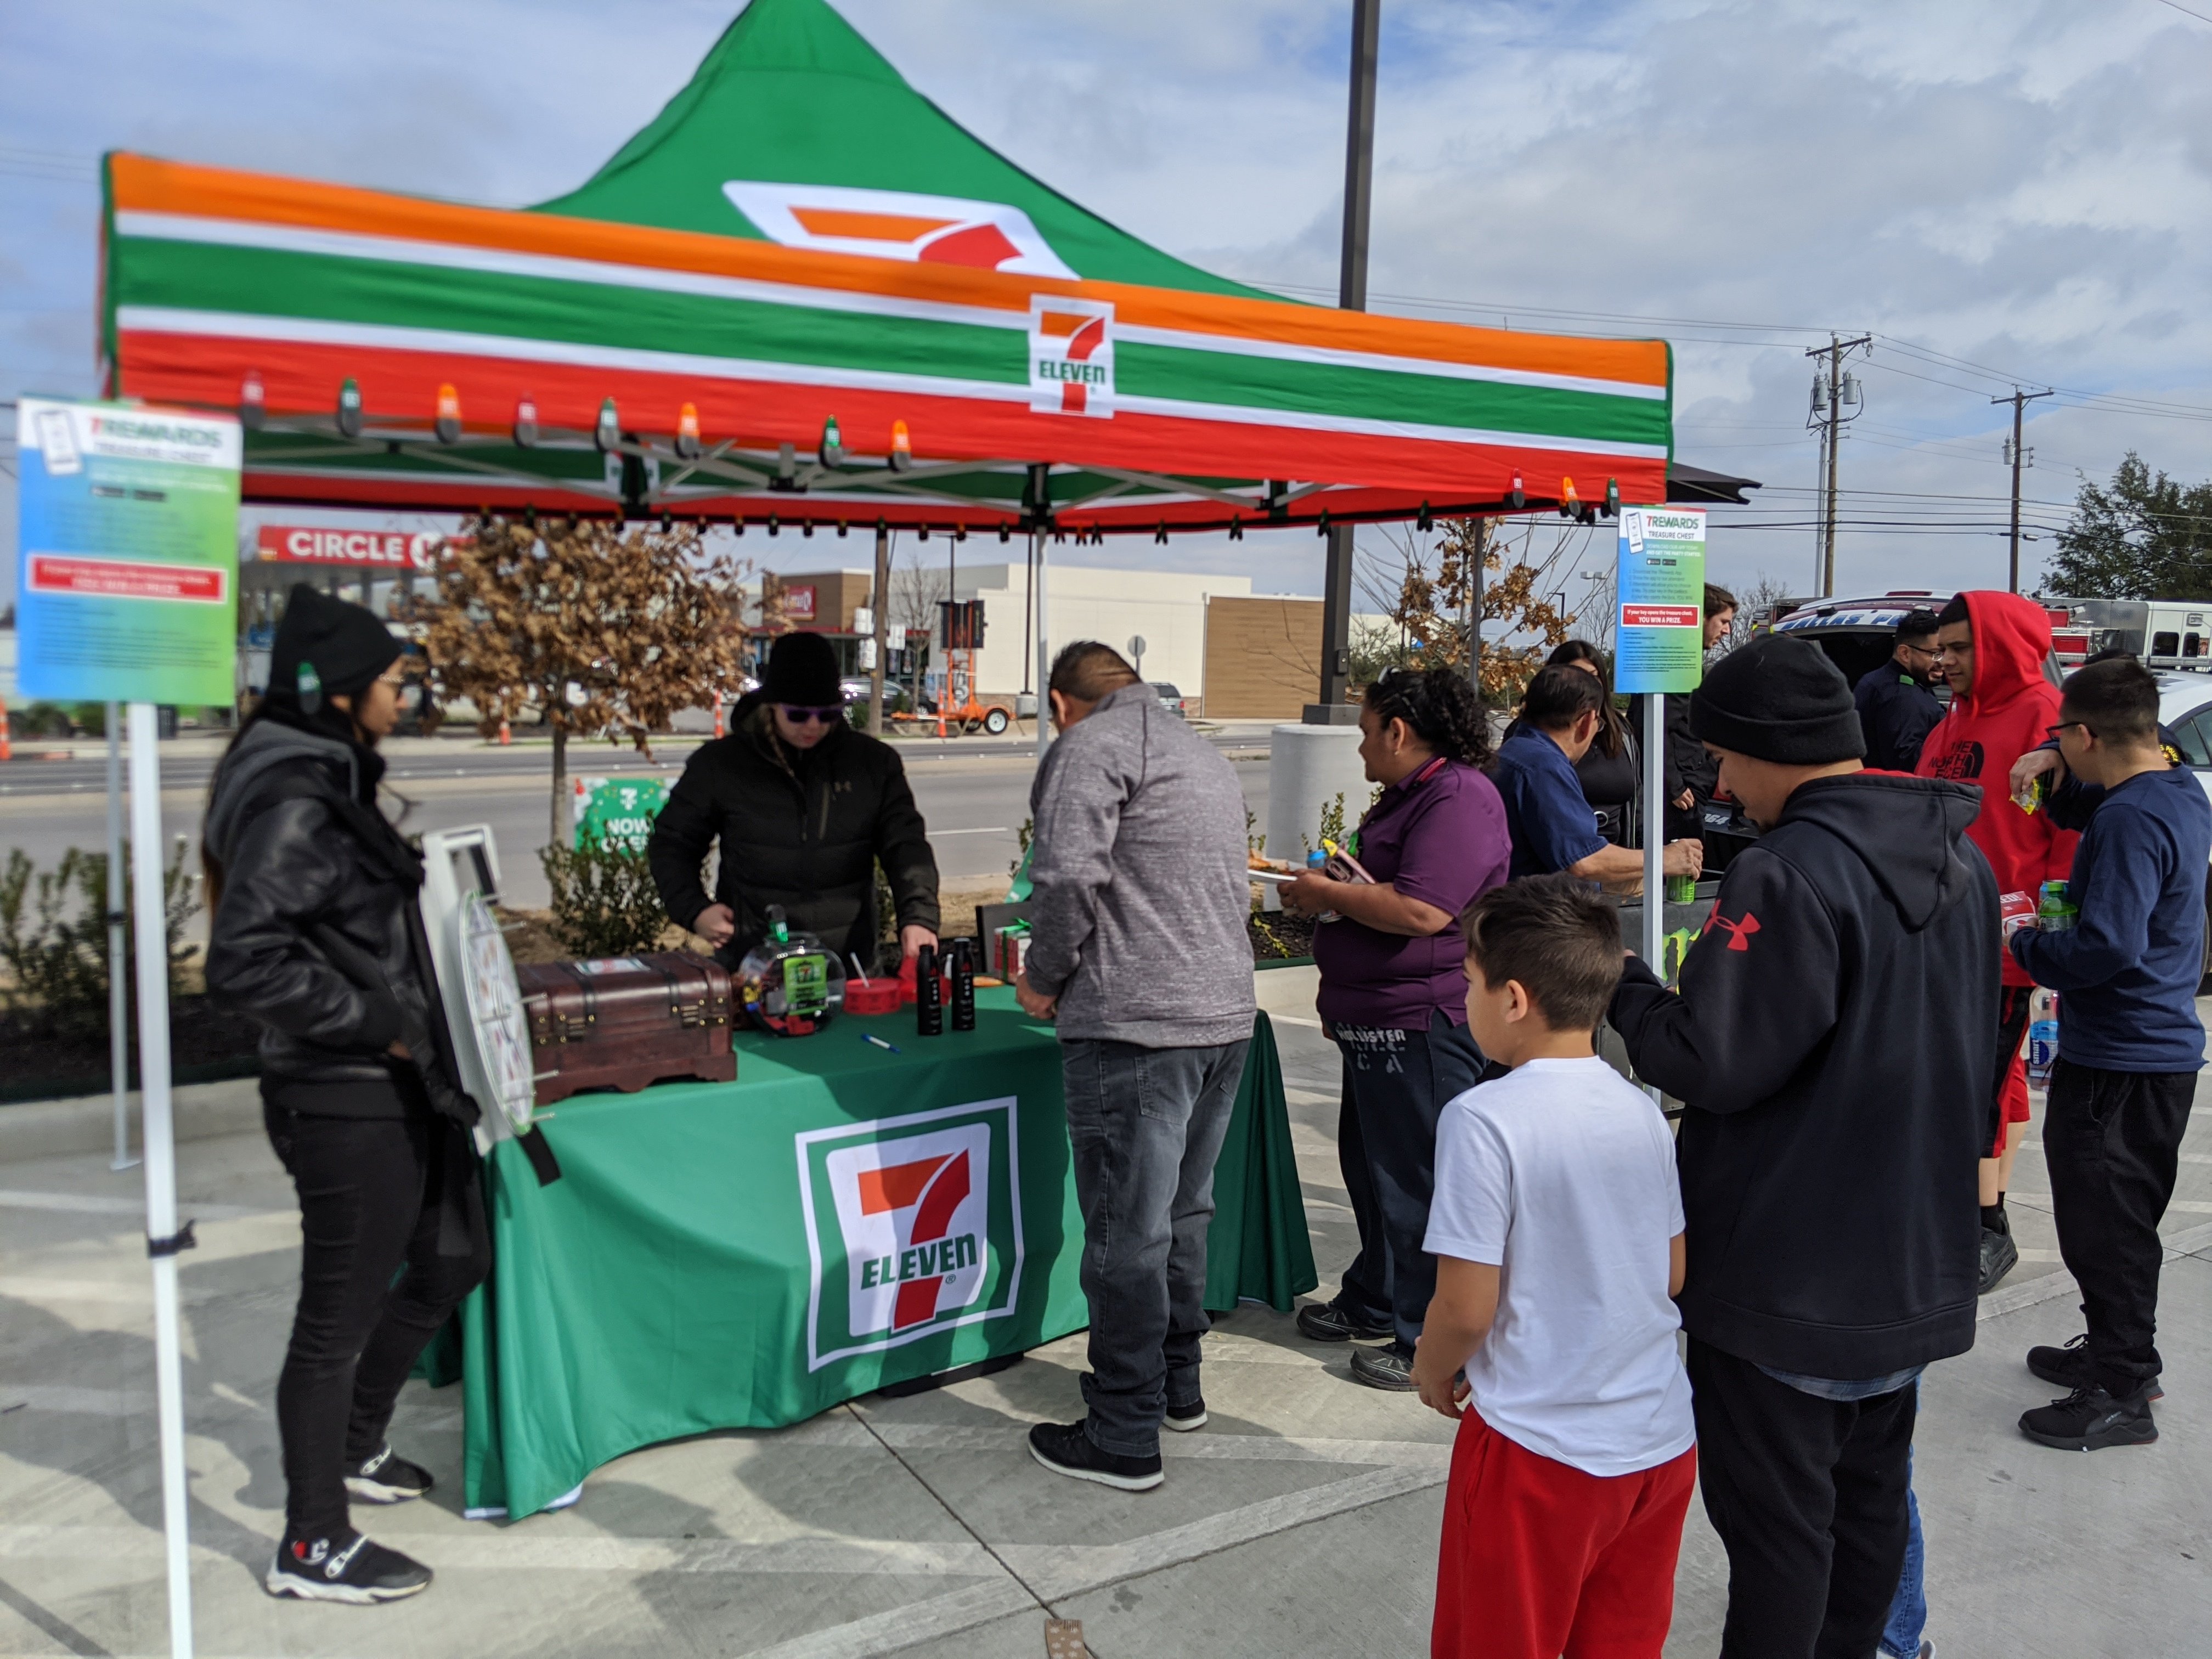 7-Eleven Grand Opening Game Tent